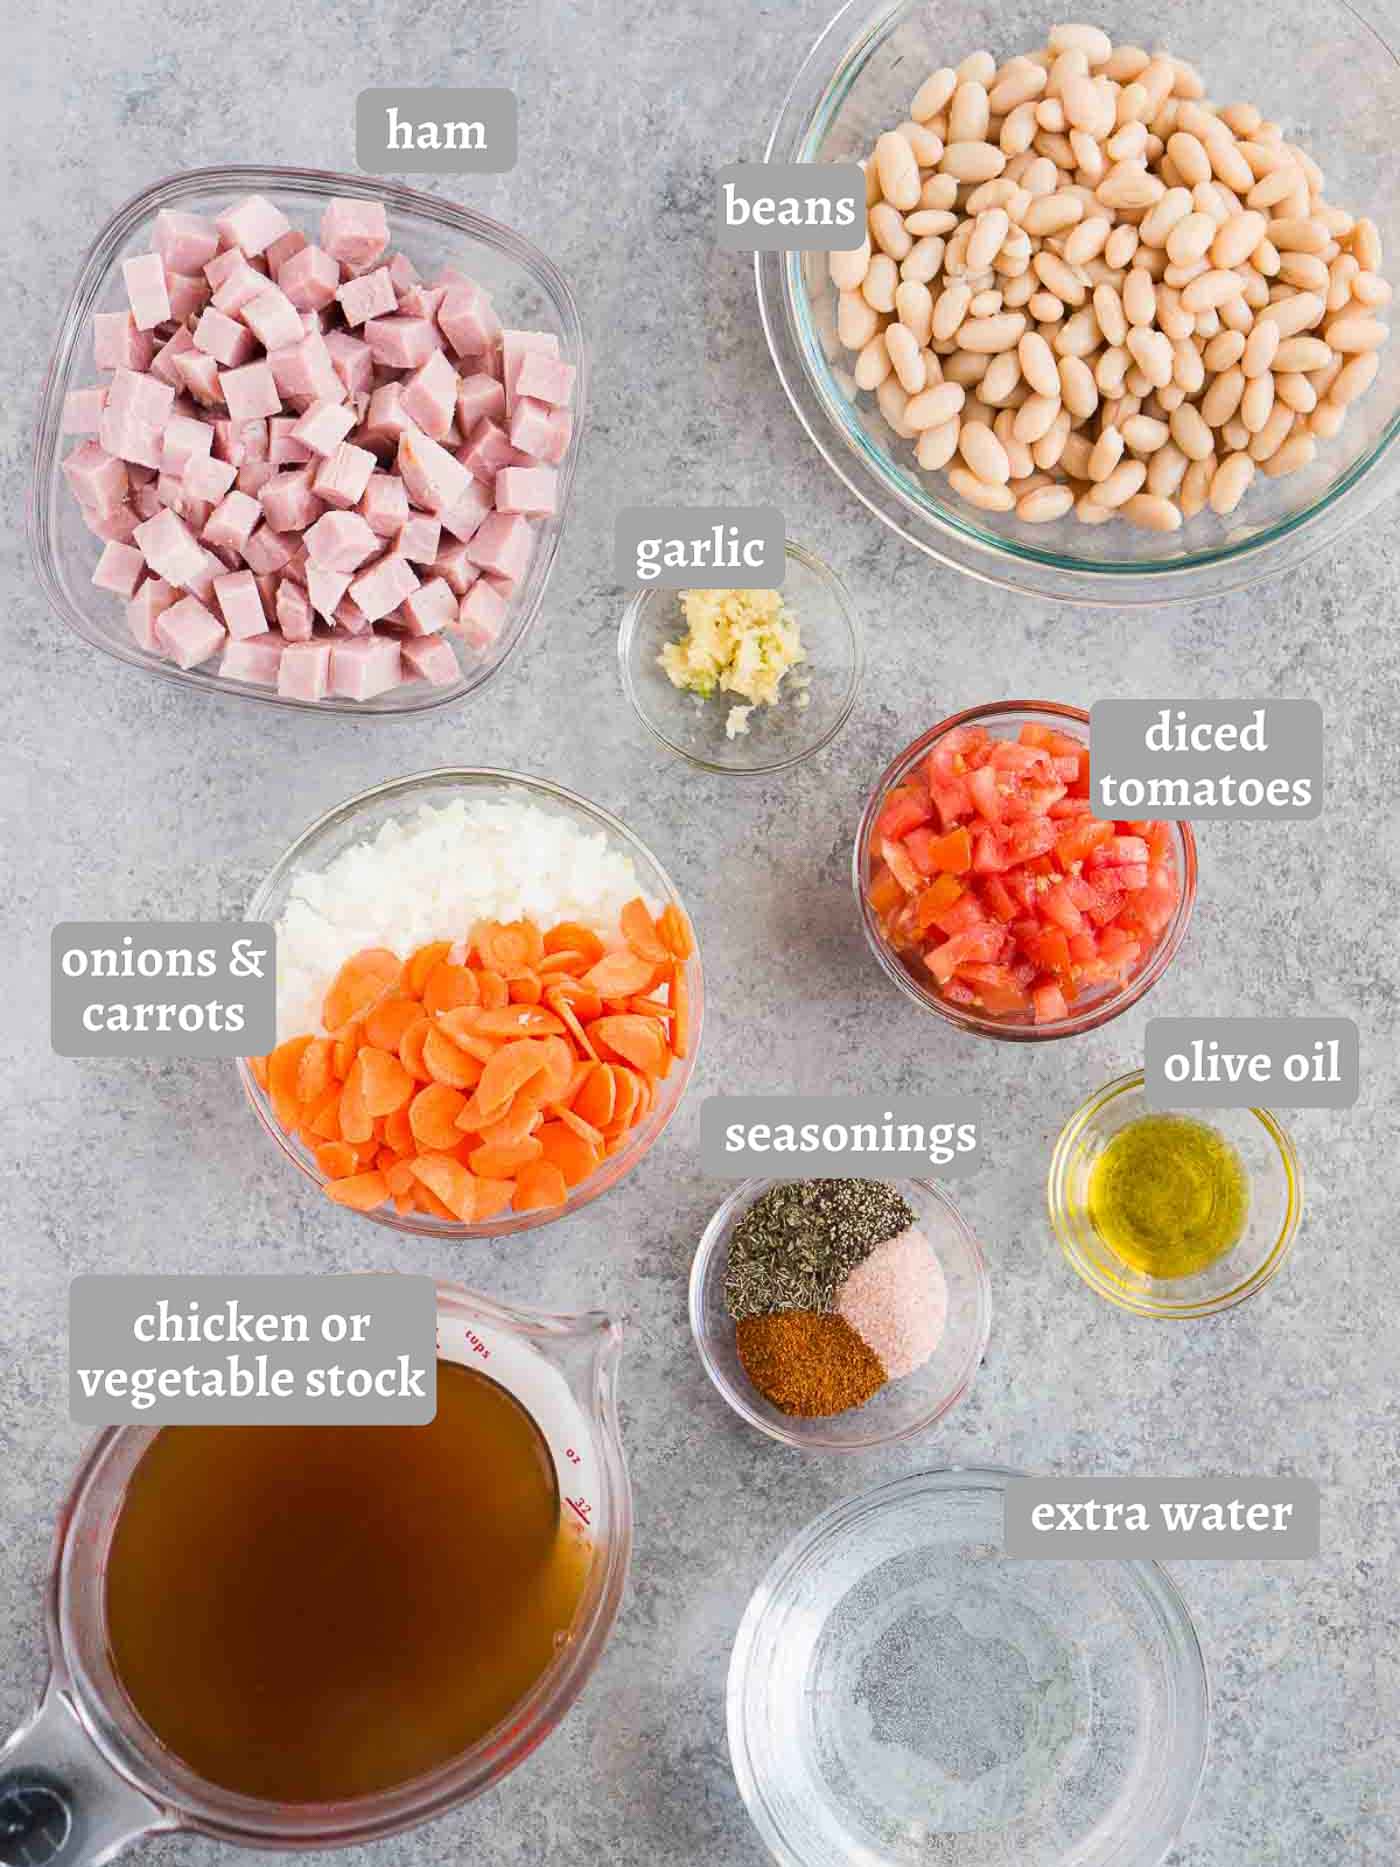 ham and white bean soup ingredients